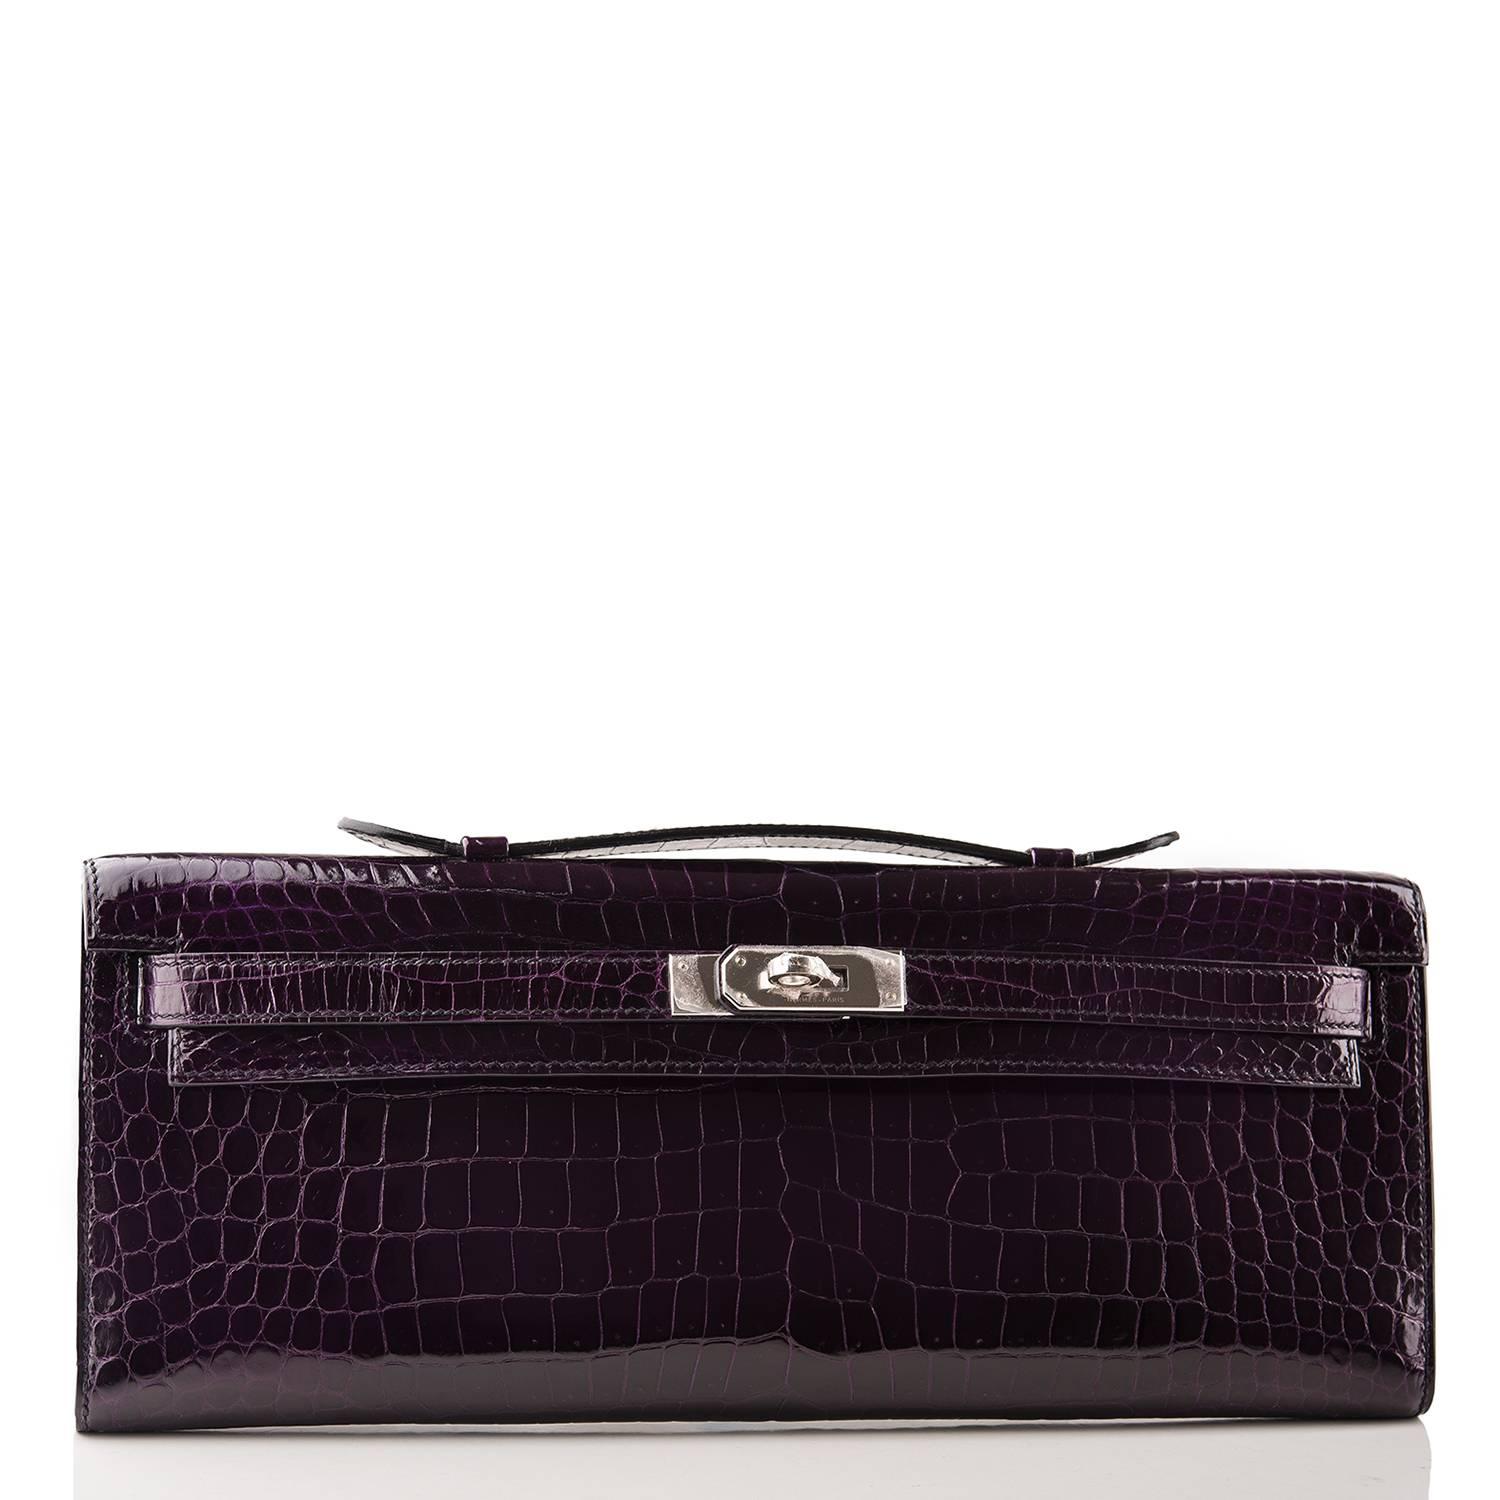 Hermes Aubergine Kelly Cut of shiny porosus crocodile with palladium hardware.

This exotic deep purple Kelly Cut has tonal stitching, front straps with a toggle closure and a top flat handle.

The interior is lined with Aubergine chevre leather and